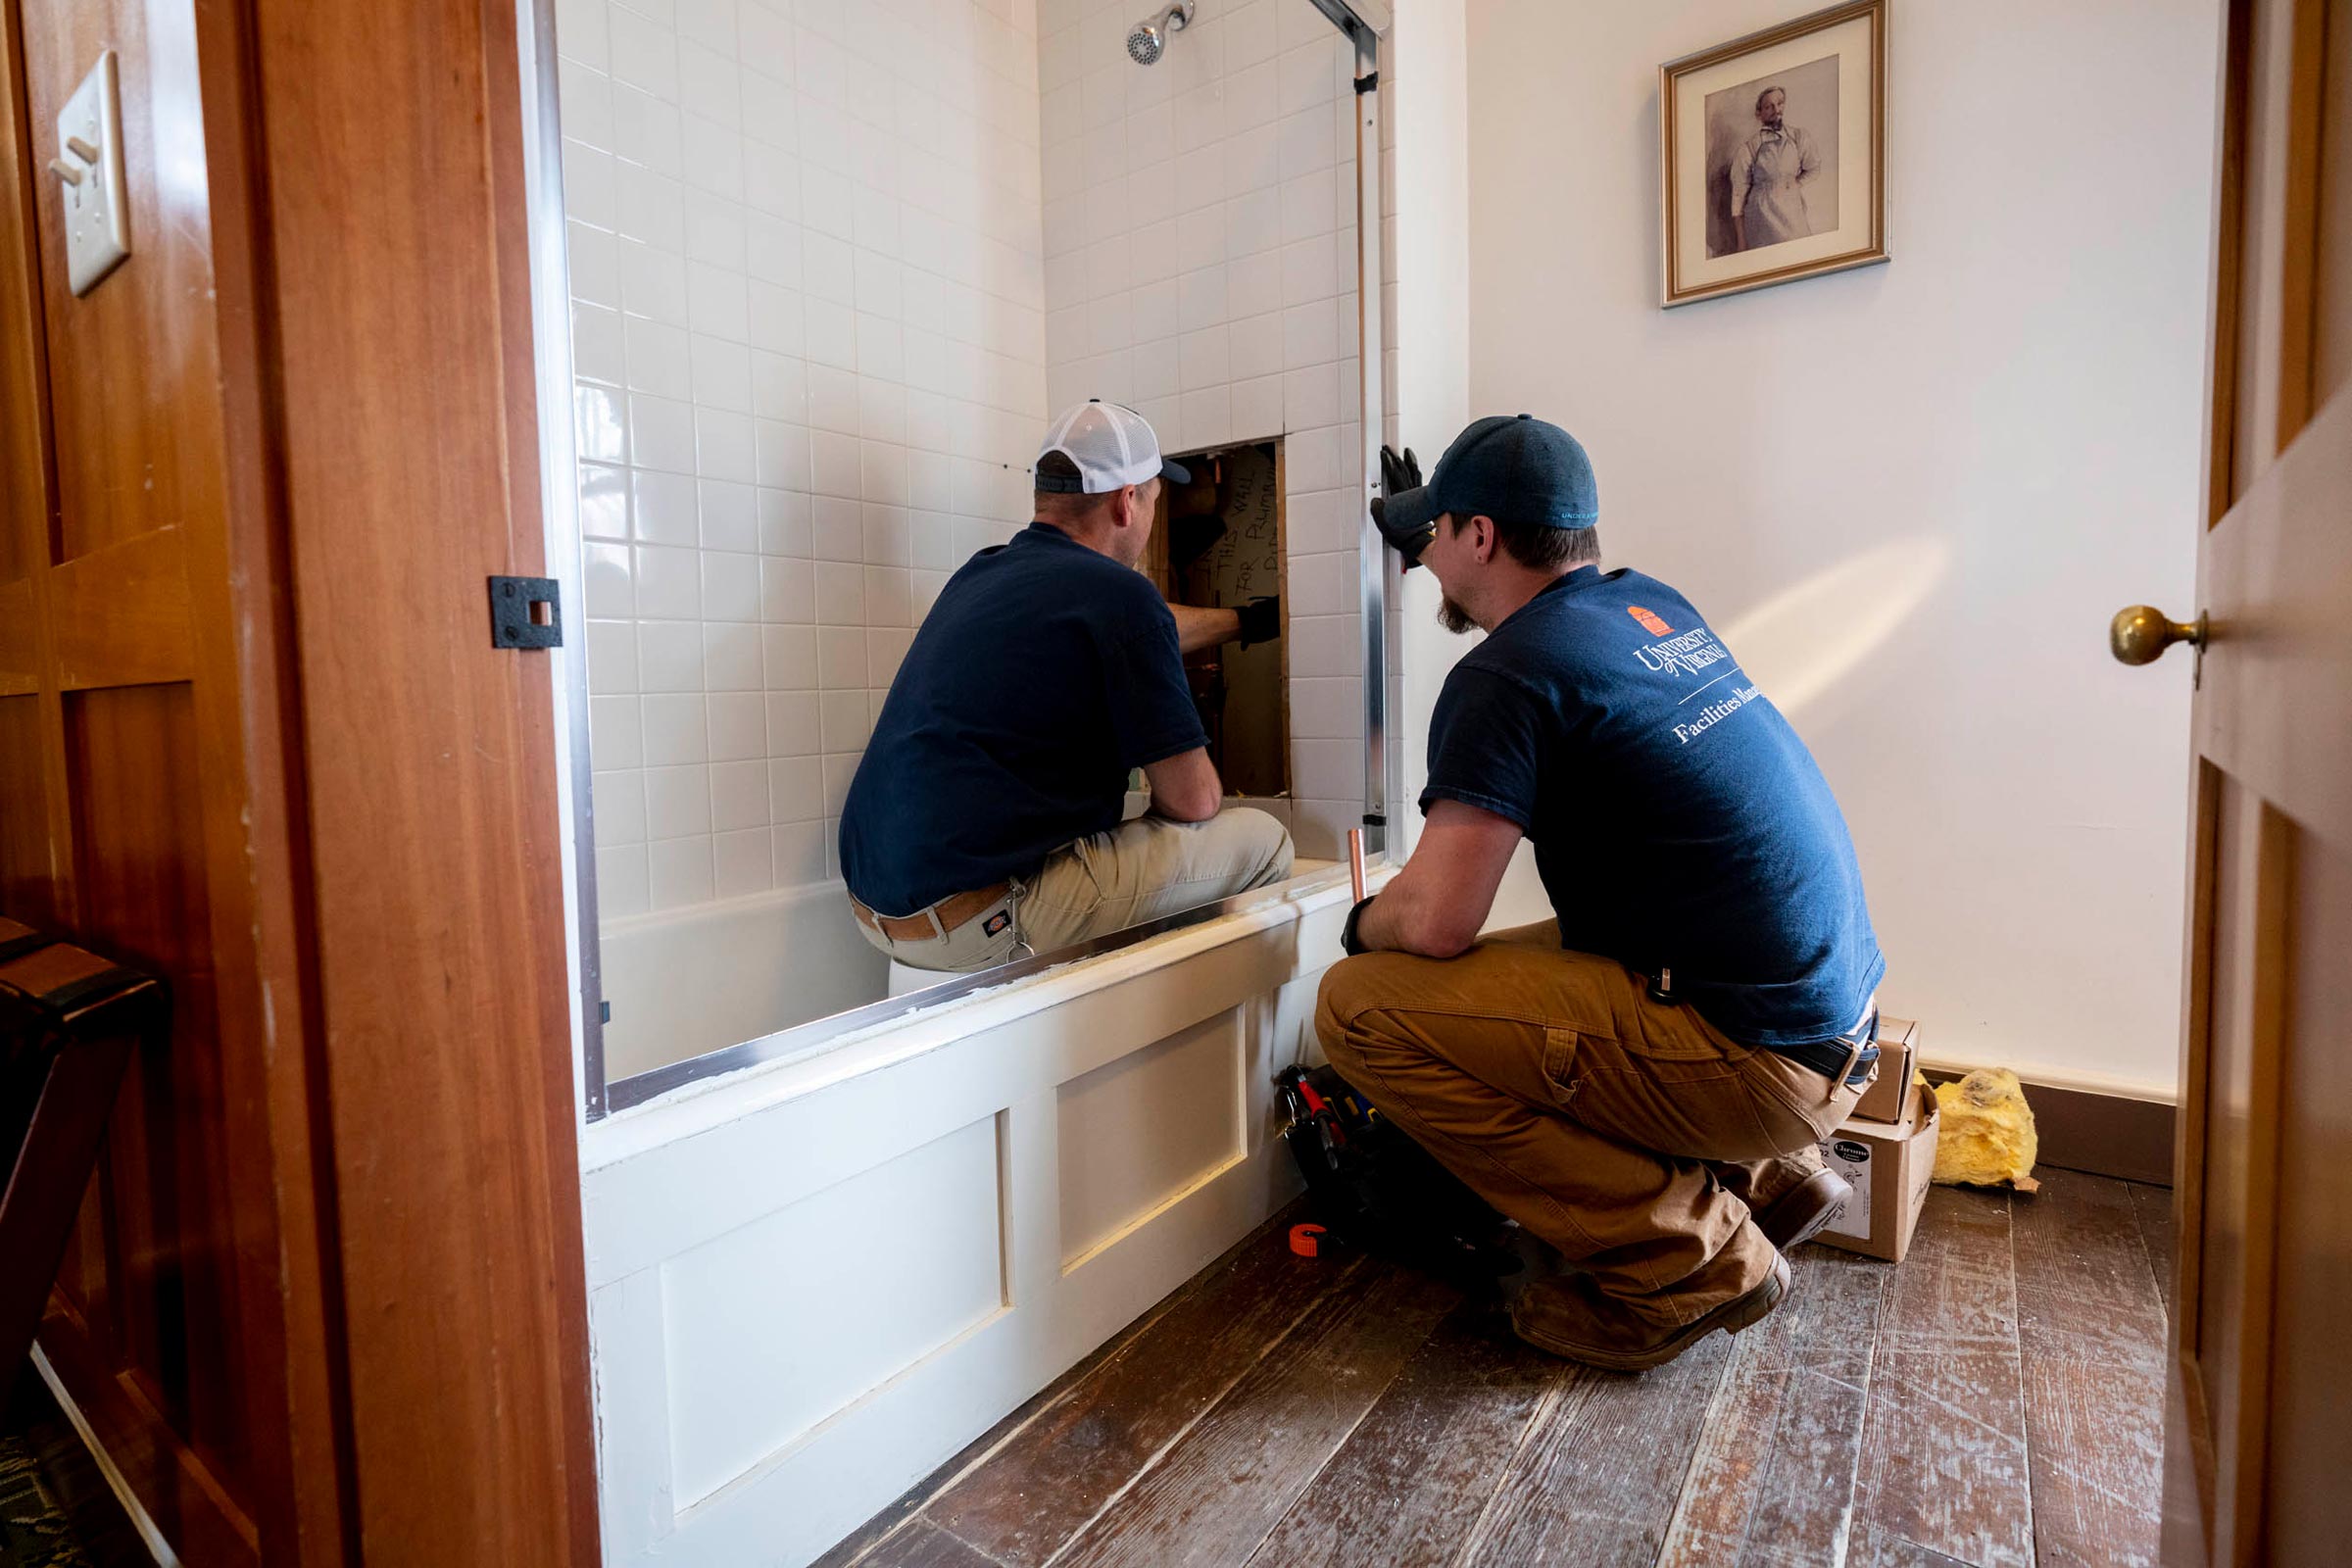 Two facilities management workers working on a bath tub.  One is sitting on a white 5 gallon bucket and looking into a whole in the shower wall and the second is bent down watching